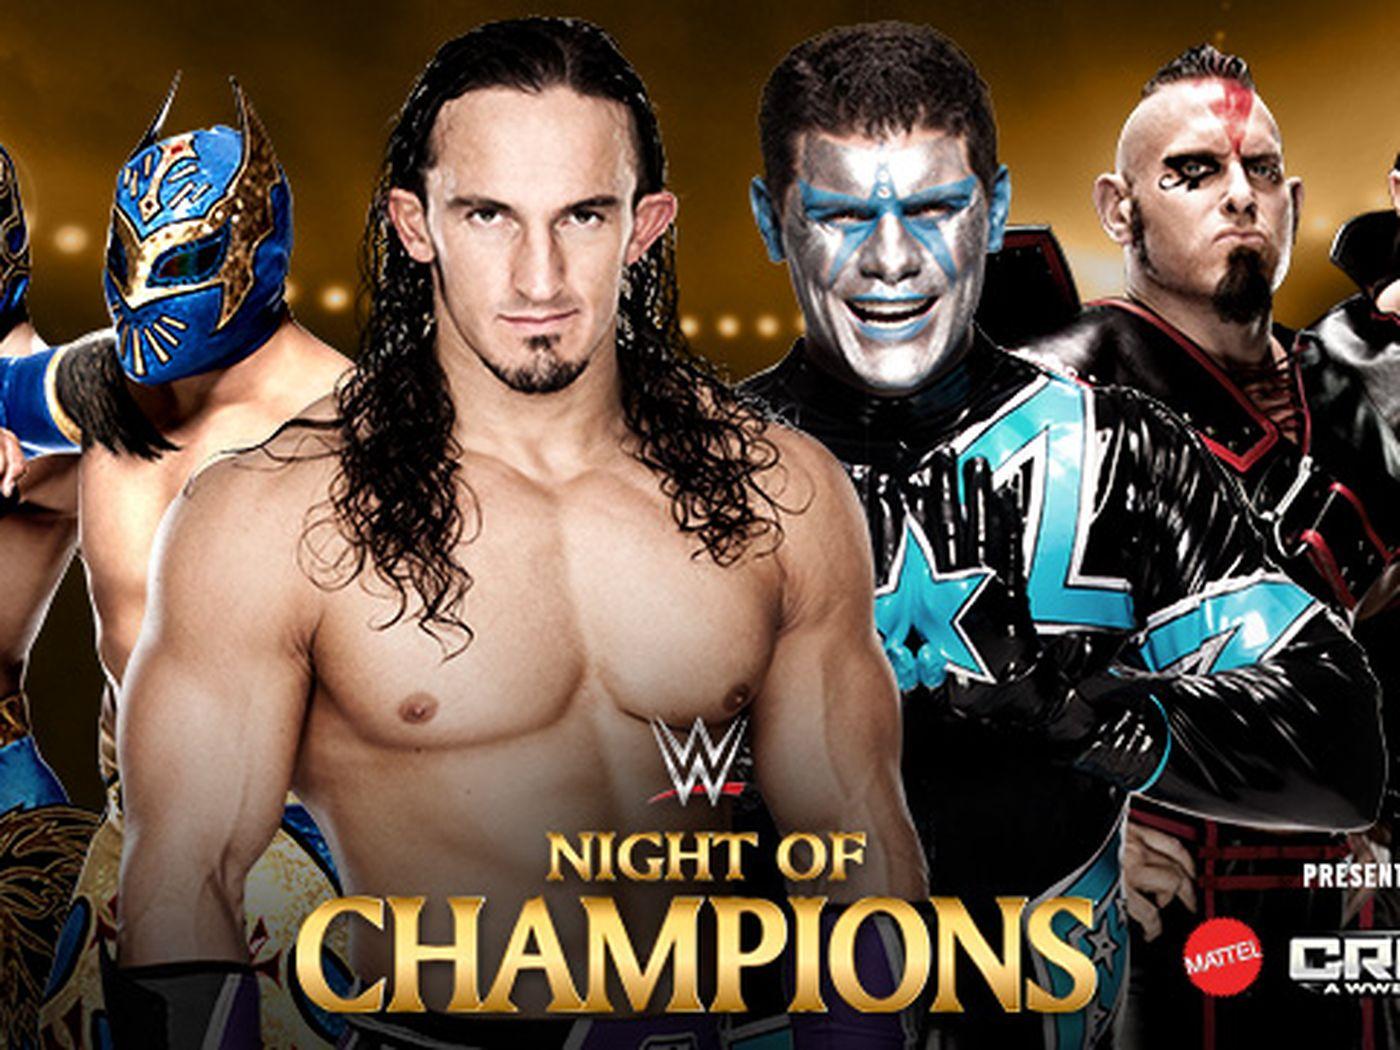 WWE Night of Champions 2015 match card complete with Cosmic